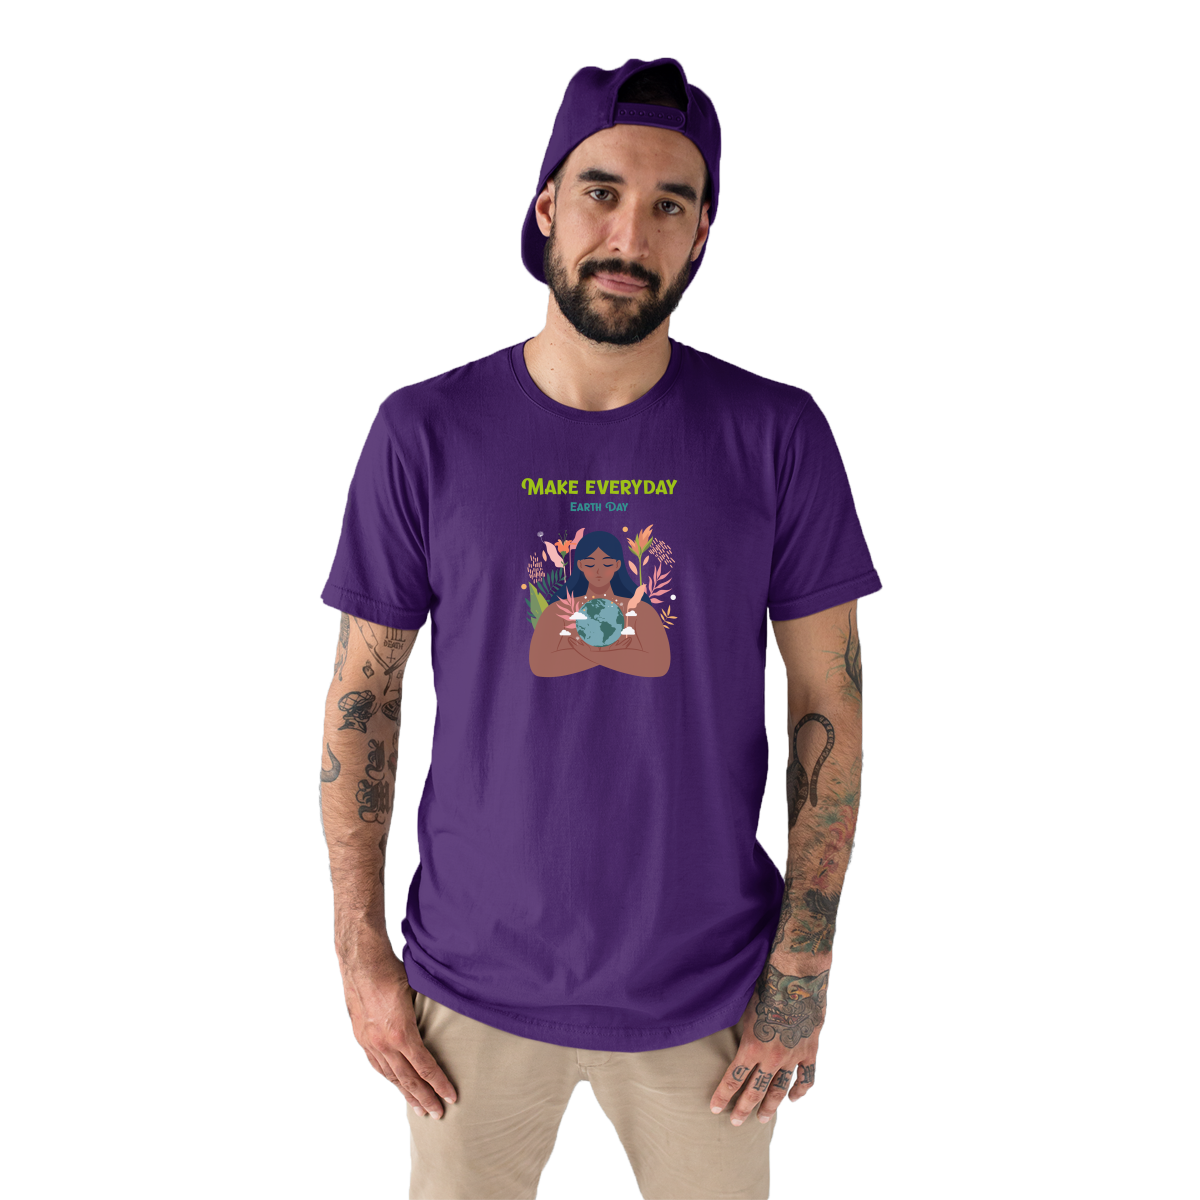 Earth Day Everyday Men's T-shirt | Purple